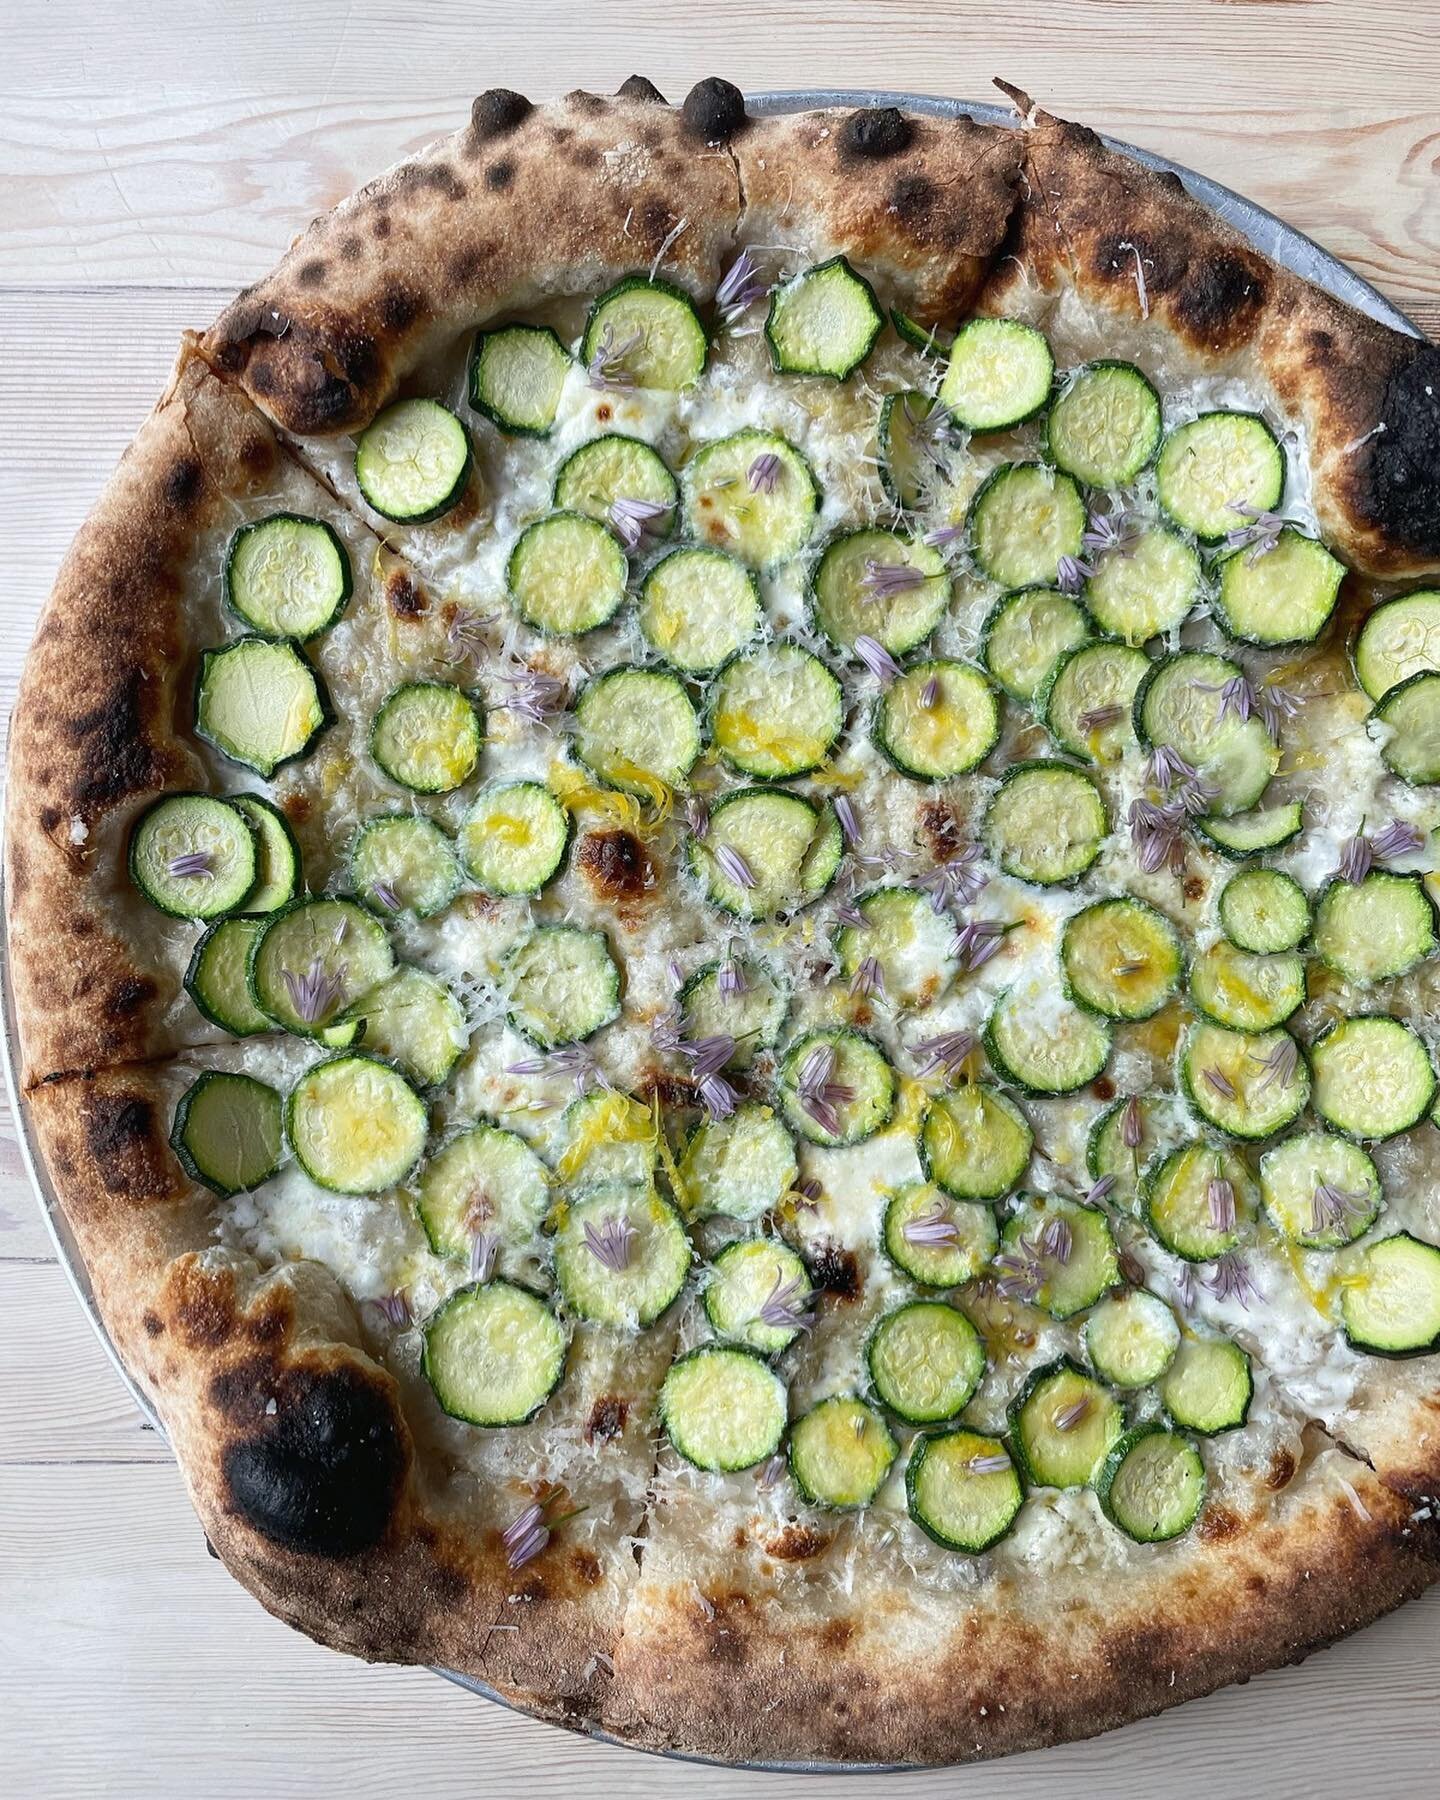 Whole pizzas available for dine in or takeout from 3pm to 9pm &hellip; including this zucchini pie with garlic cream, calabrian chili, sheep cheese, mozzarella, and lemon.